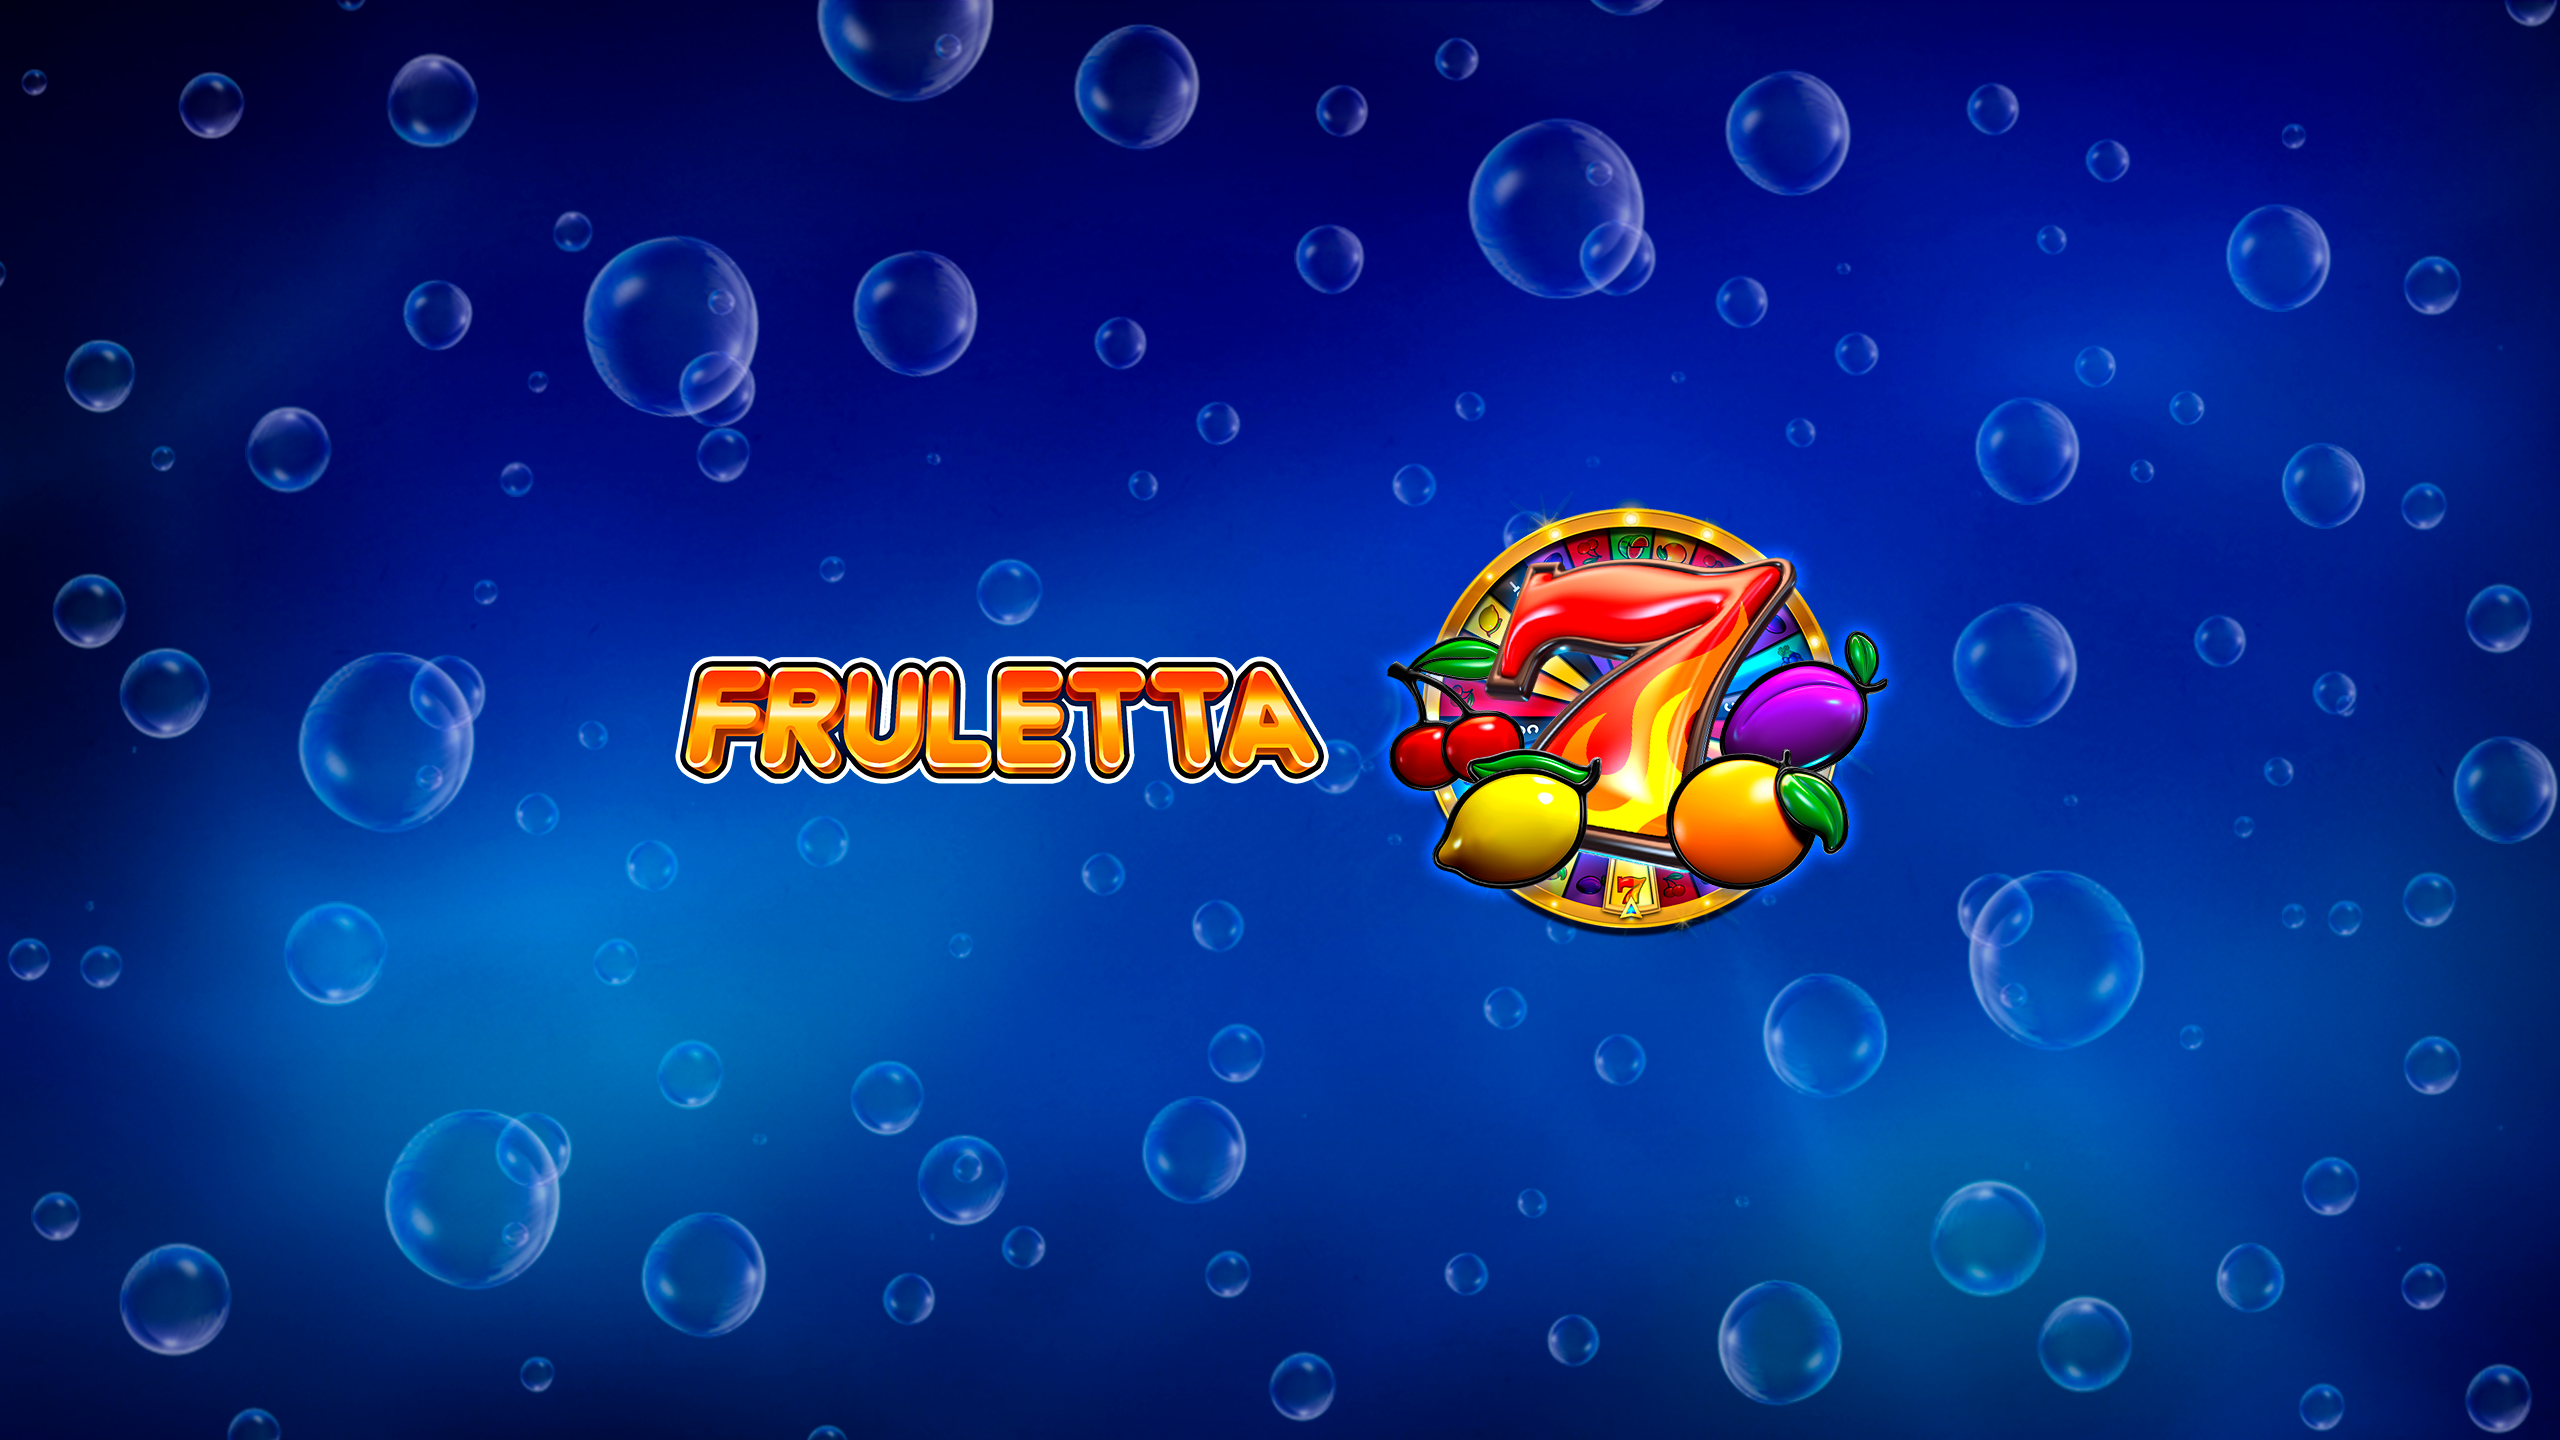 The Fruletta Endorphina Online Slot Demo Game by Endorphina